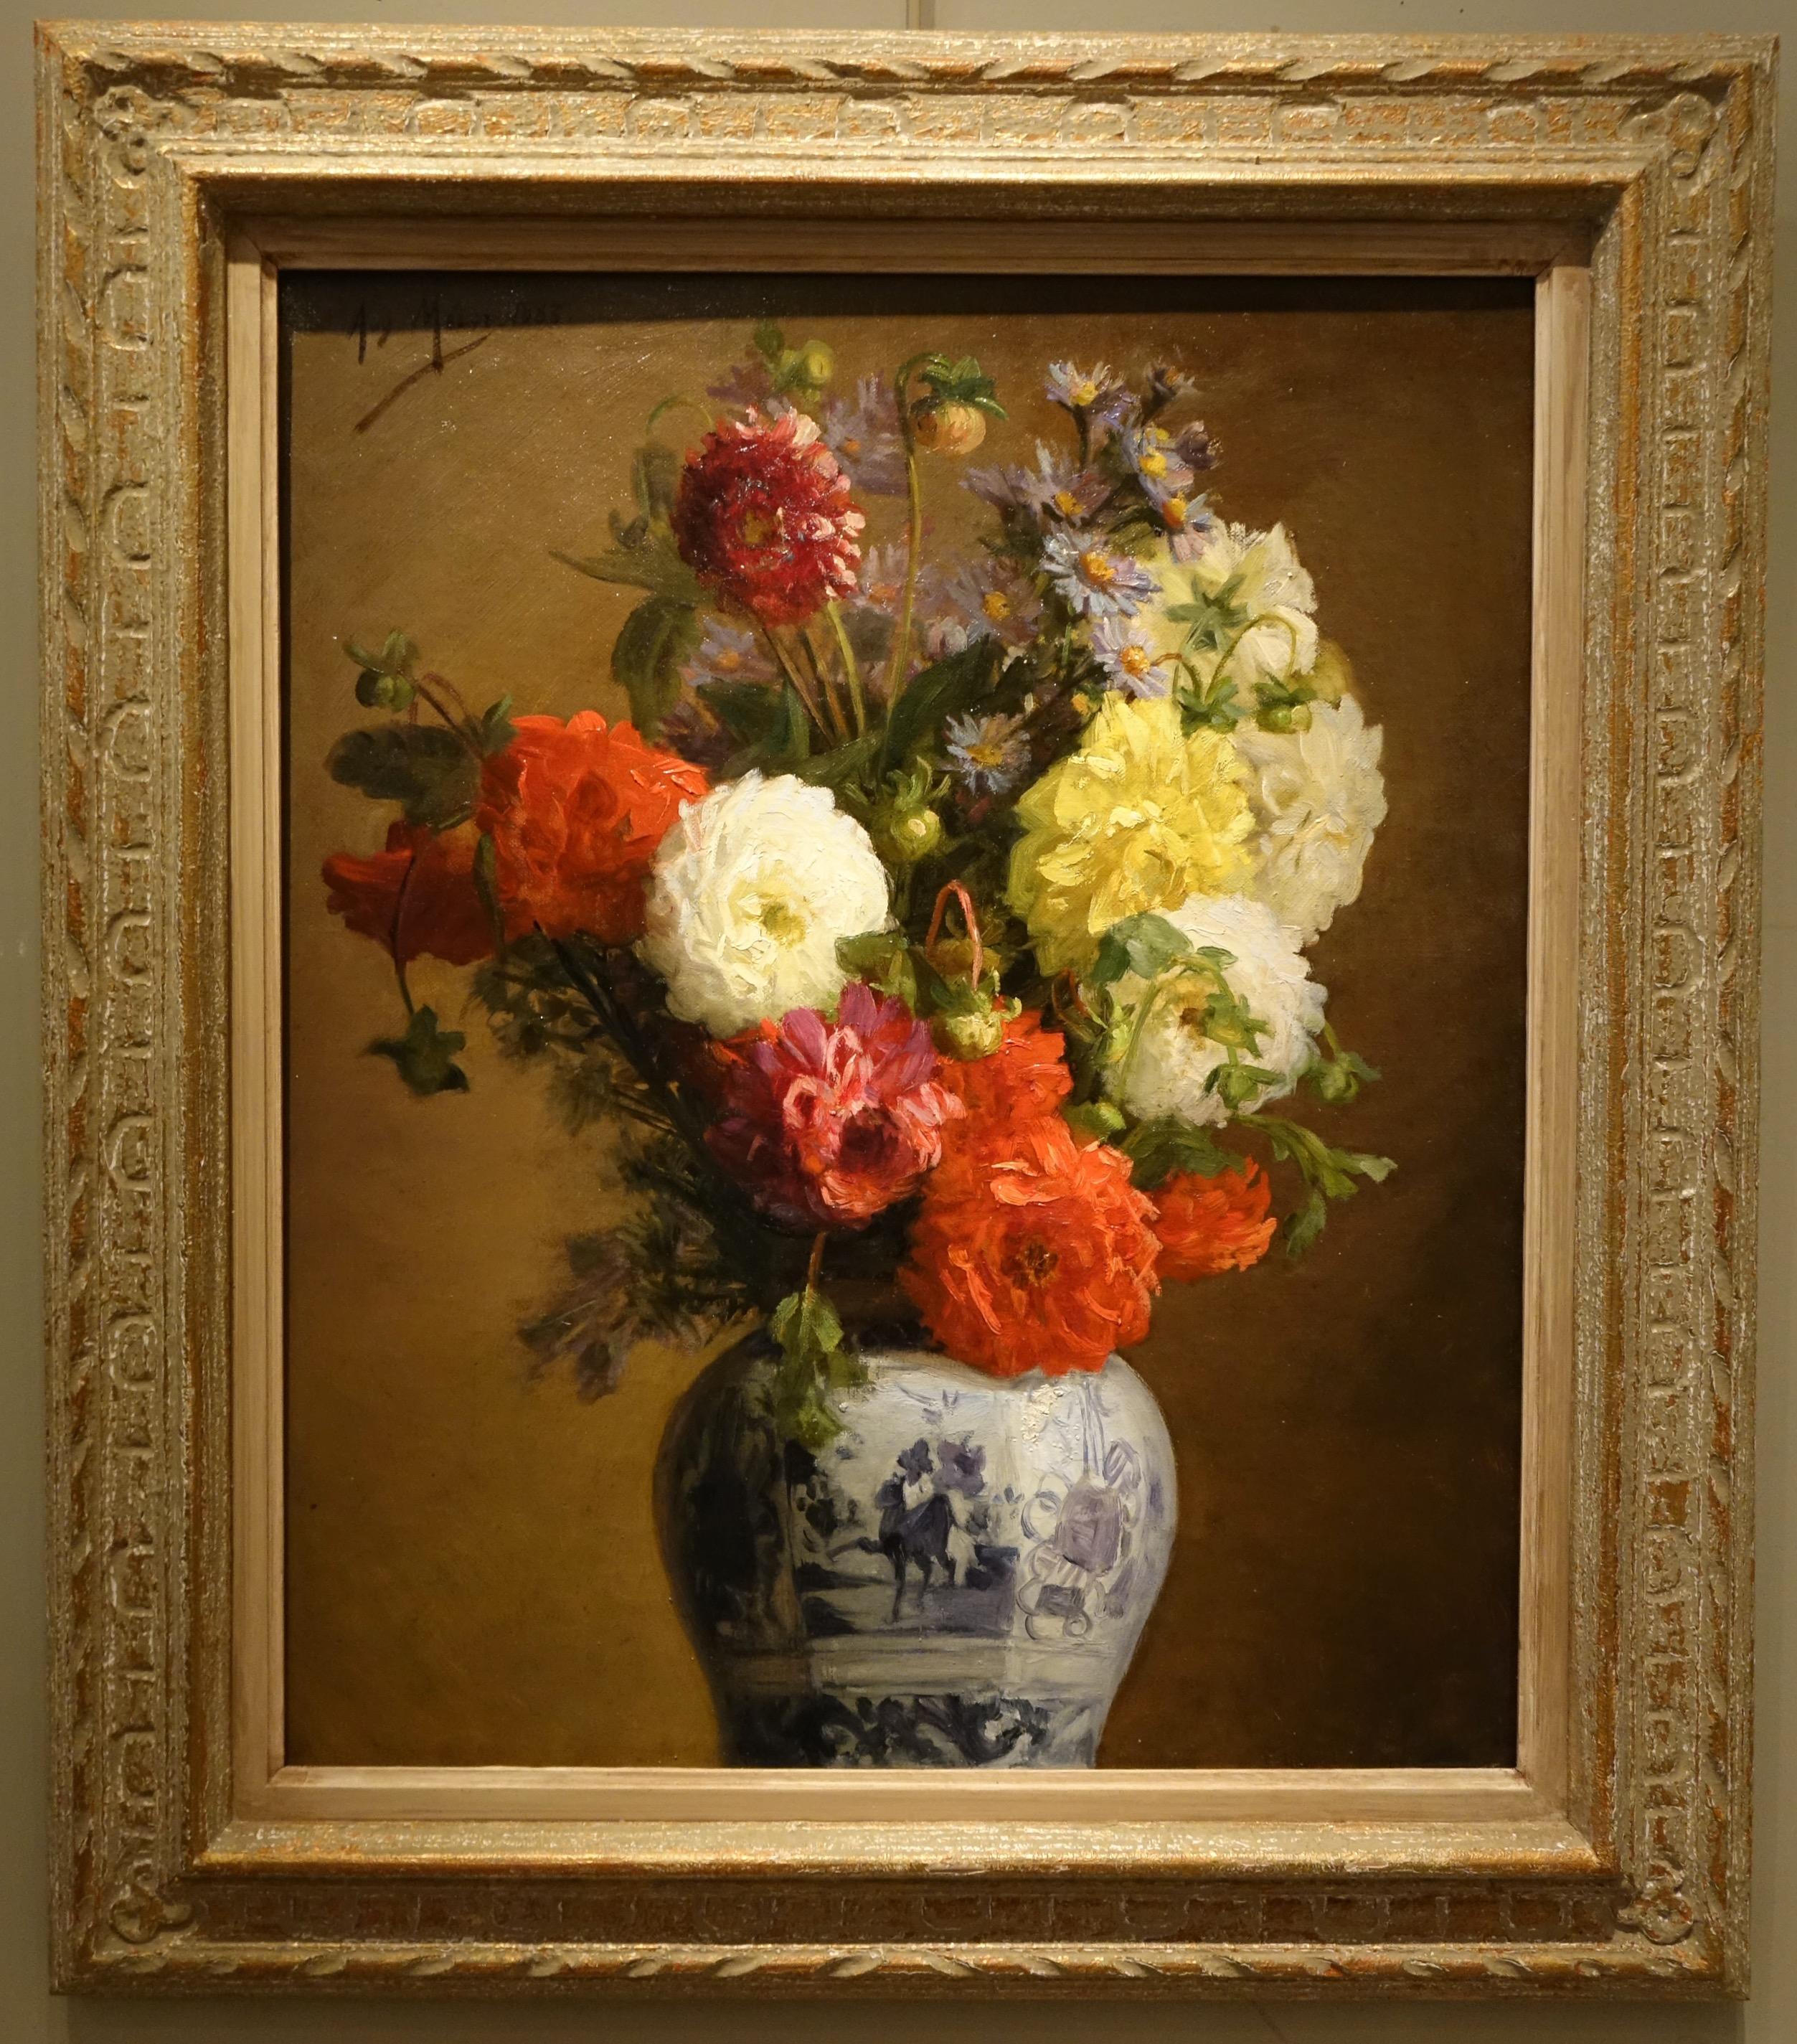 A bunch of dahlias in a Japanese vase, signed upper left A.MELOT, dated 1883.
Louis Auguste MELOT, flower painter died 1899.
French school. A member of the French Artists Association, he exhibited at their Salon for many years.
The painter's